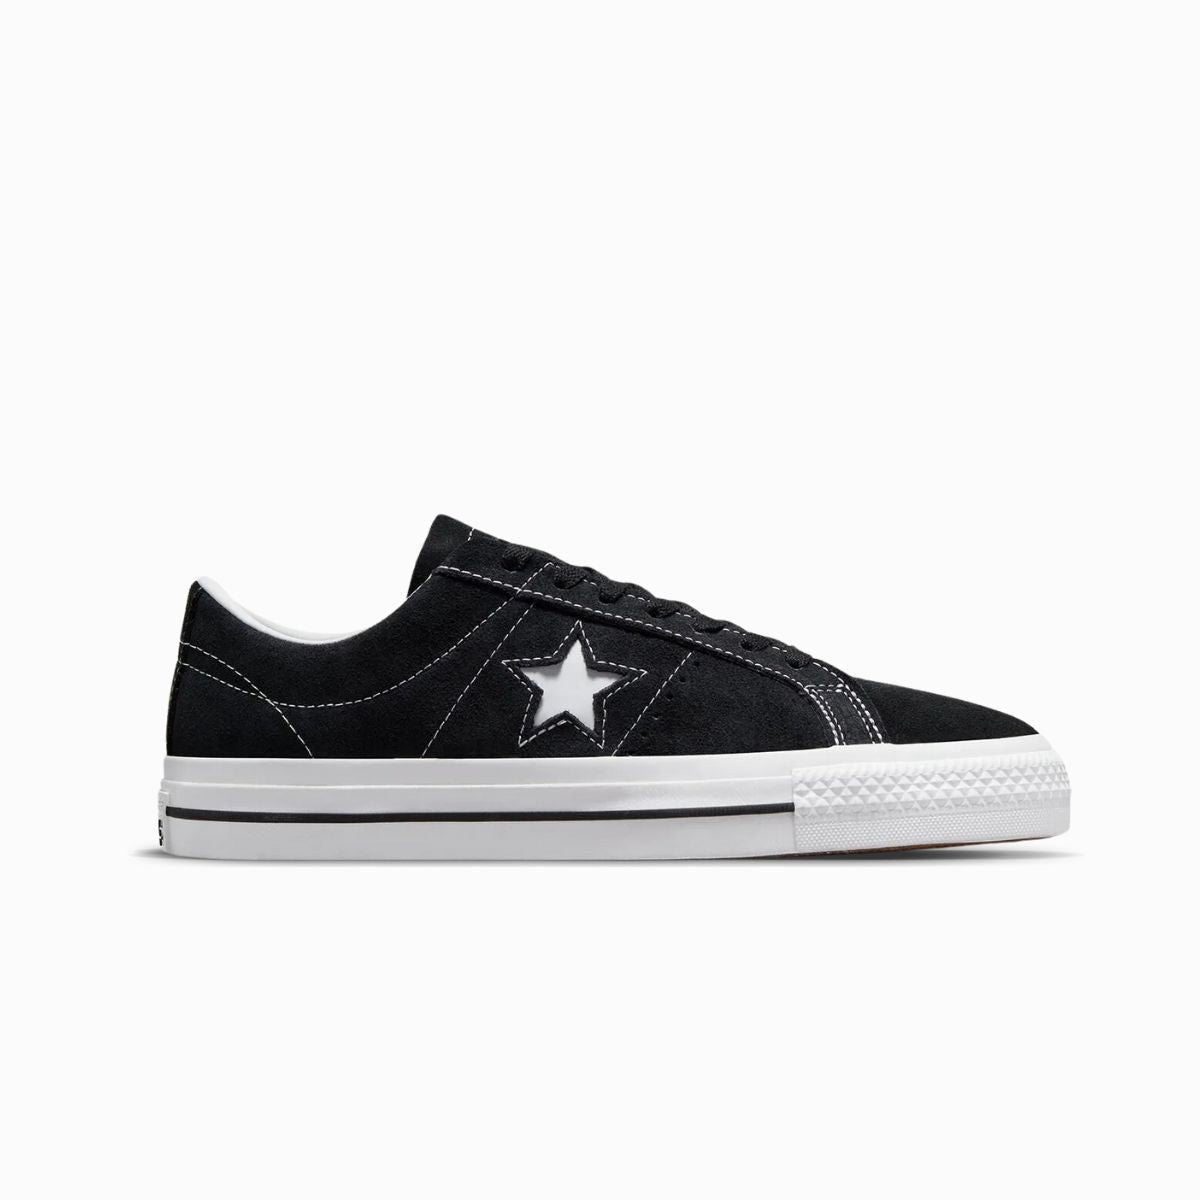 Converse One Star Replacement Shoelaces